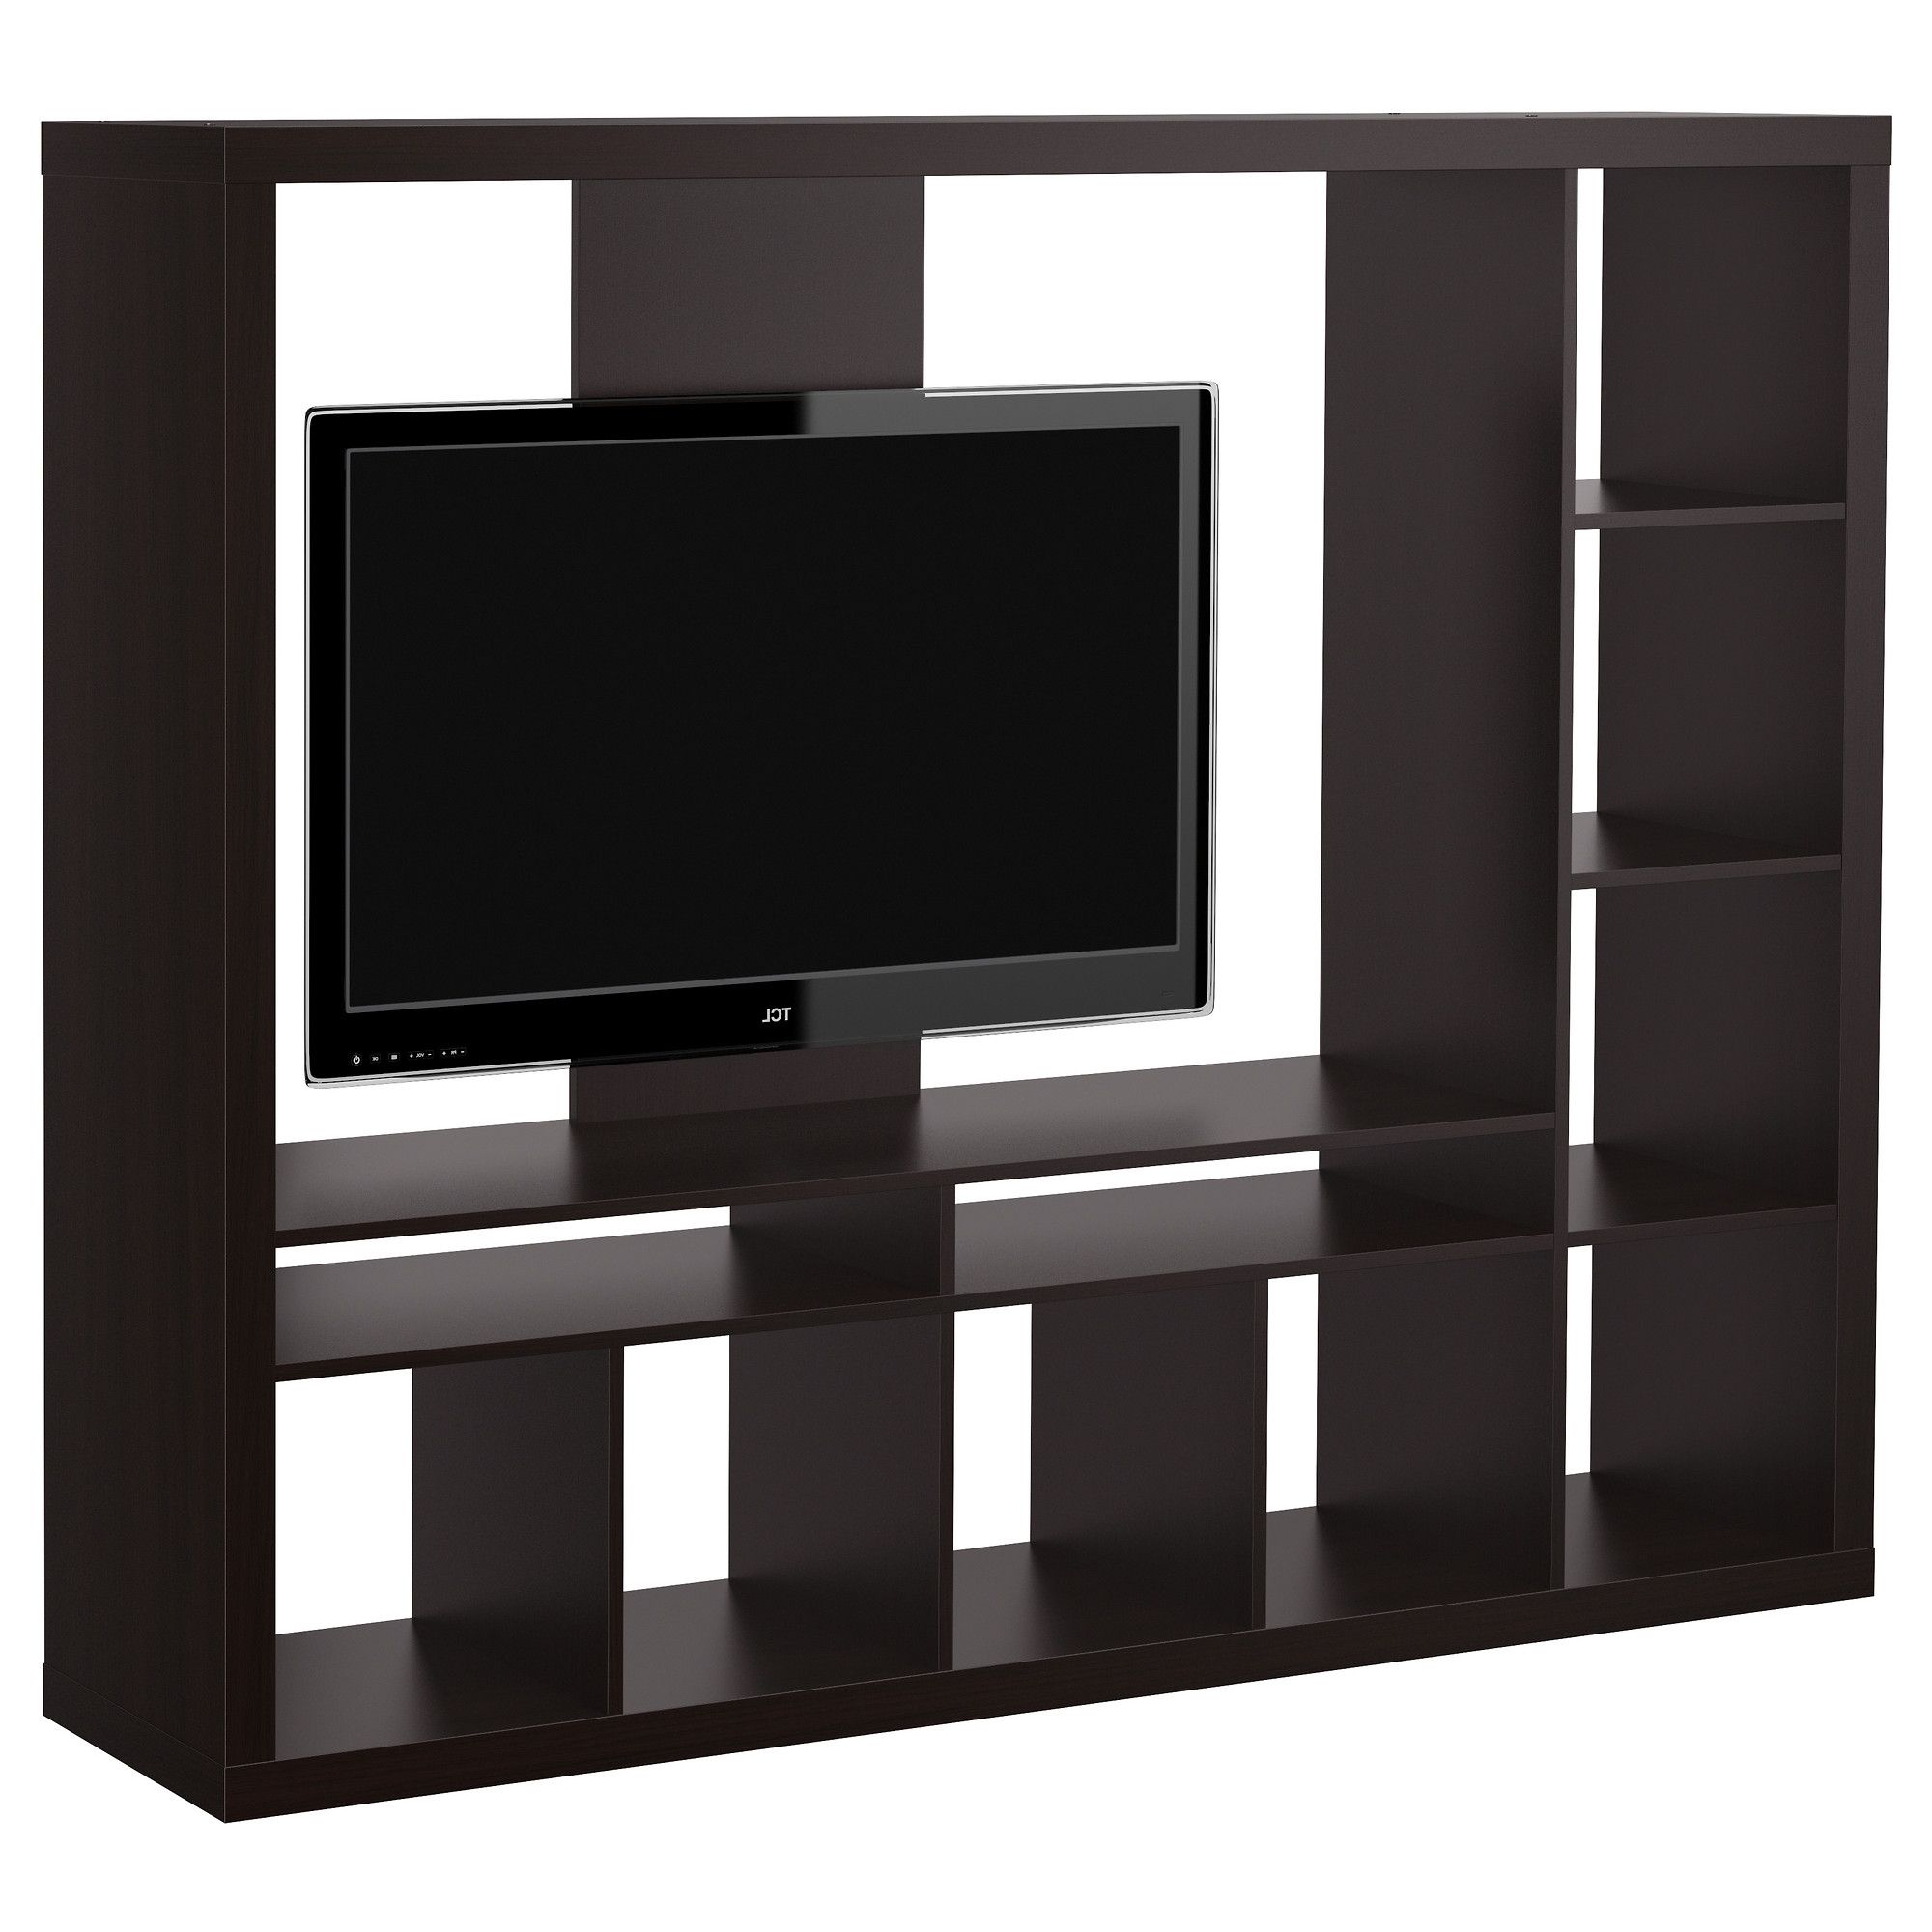 Tv Storage Unit Pertaining To Famous Expedit Tv Storage Unit – Black Brown – Ikea, For Separating (View 8 of 15)